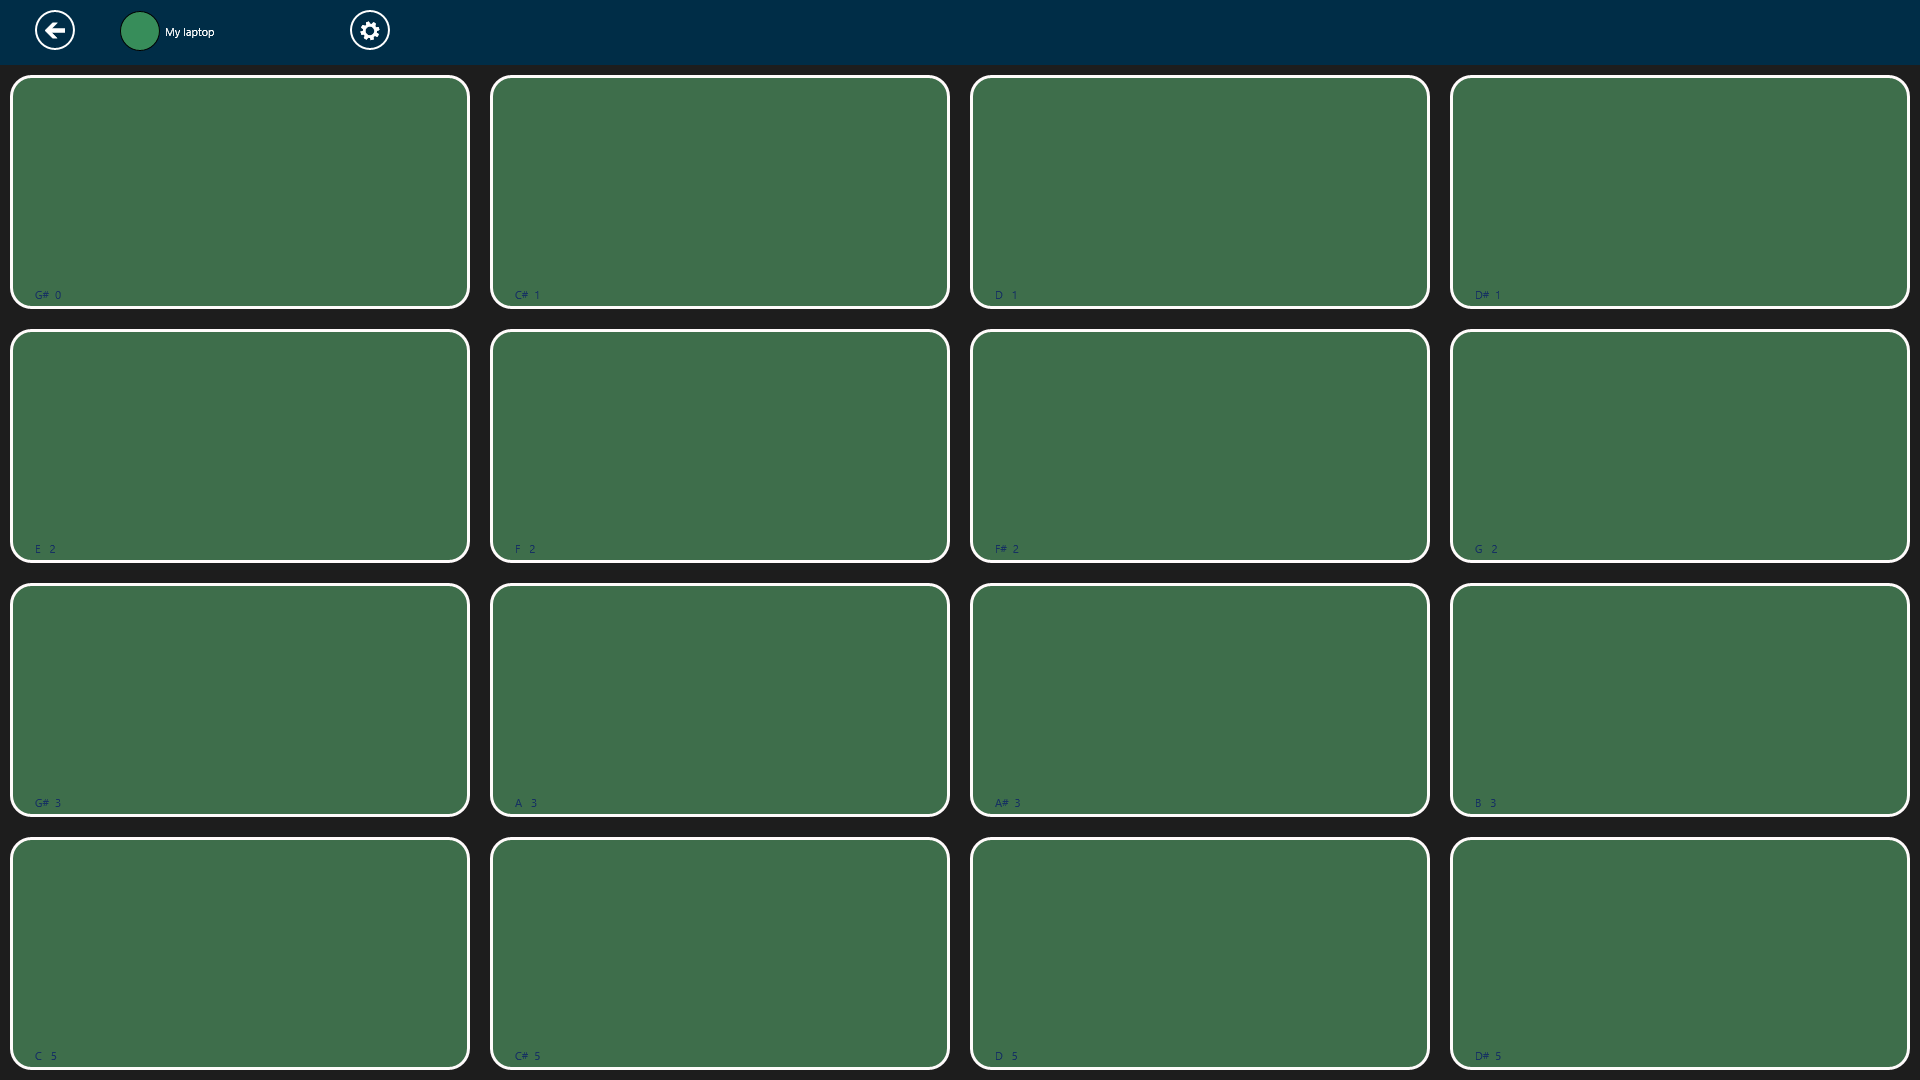 4x4 or 6x6 grid of touch pads.